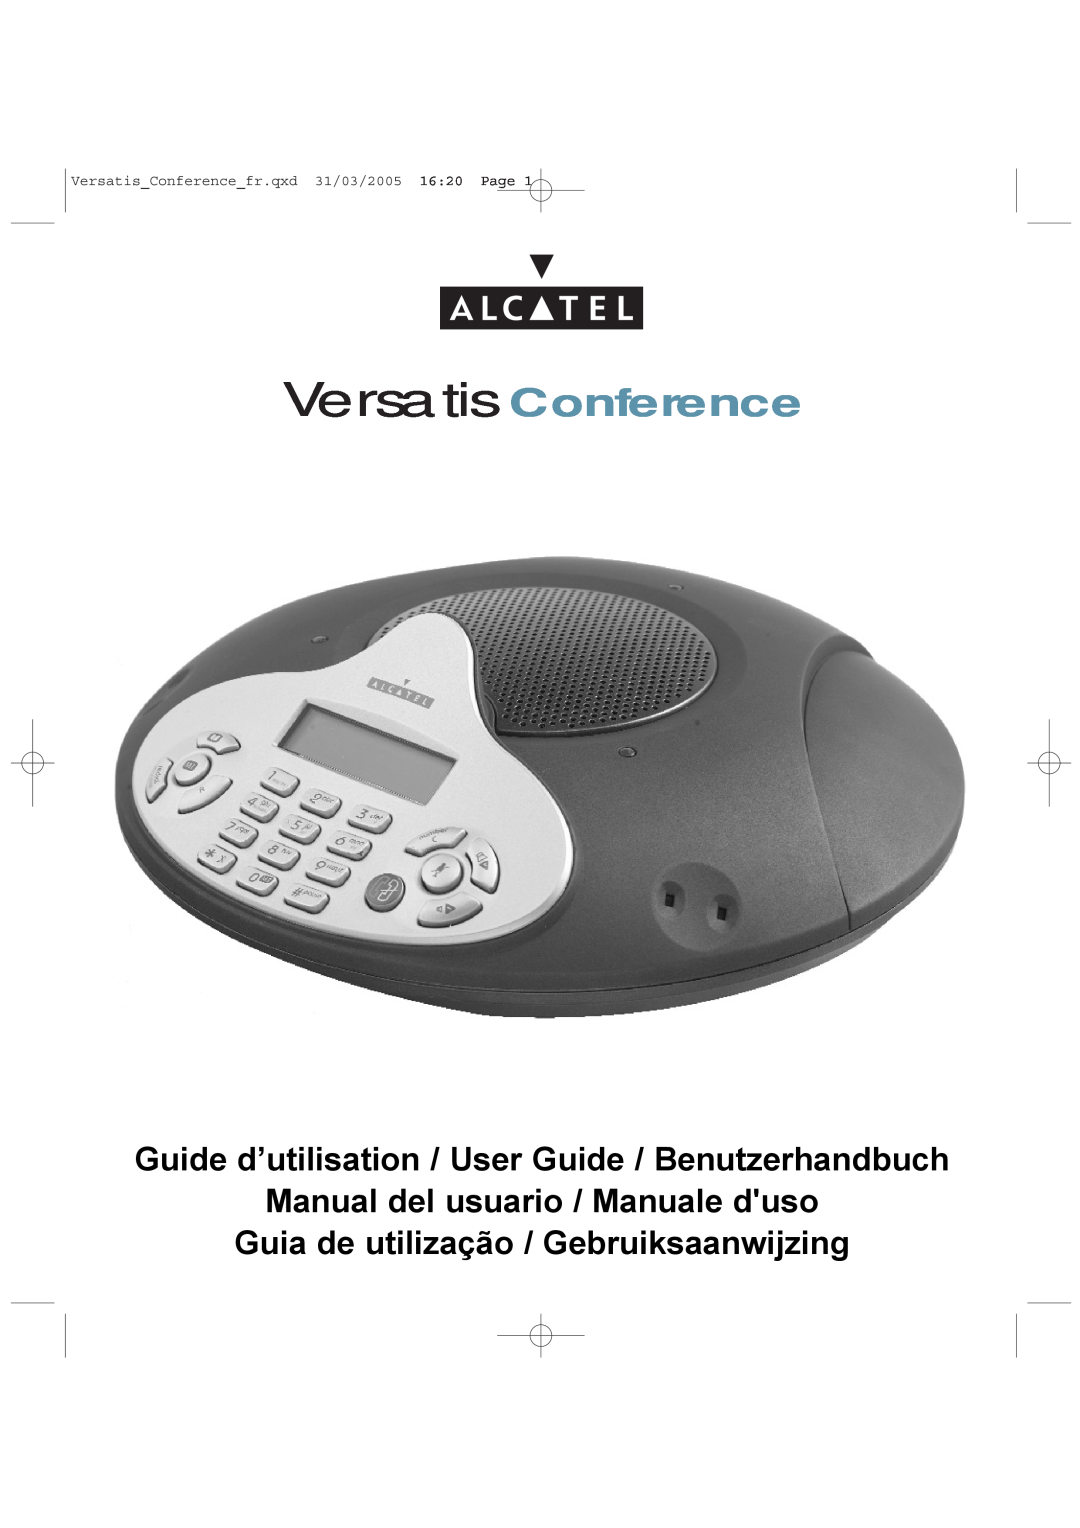 Alcatel Carrier Internetworking Solutions Conference Phone manual VersatisConferencefr.qxd 31/03/2005 1620 Page 